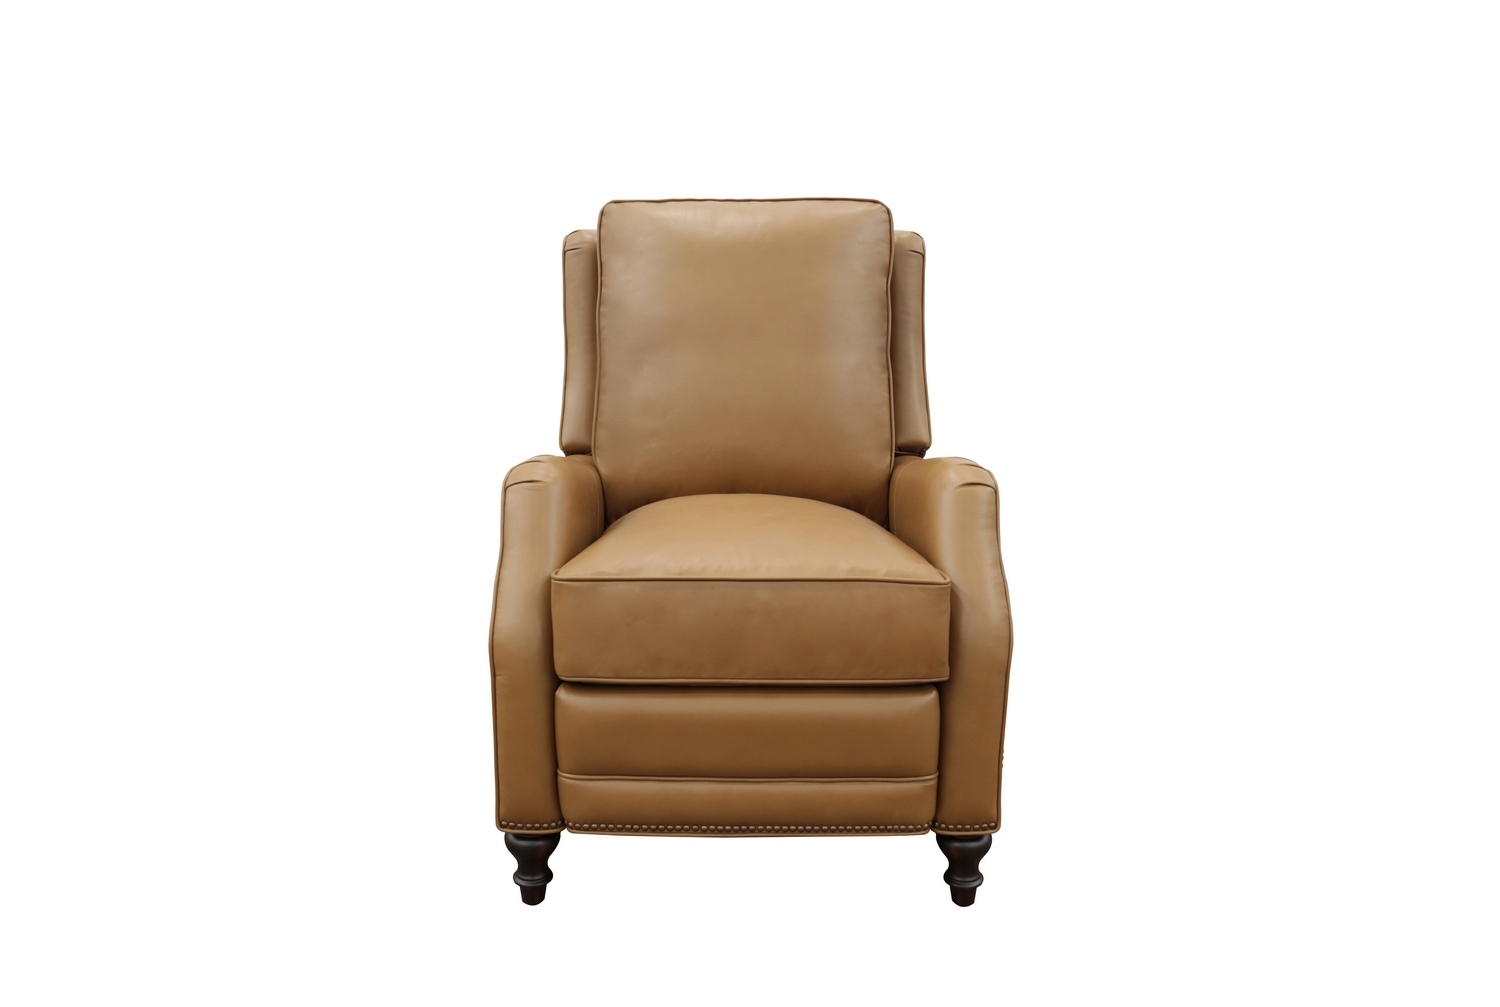 Barcalounger Huntington Power Recliner Chair - Shoreham Ponytail/All Leather